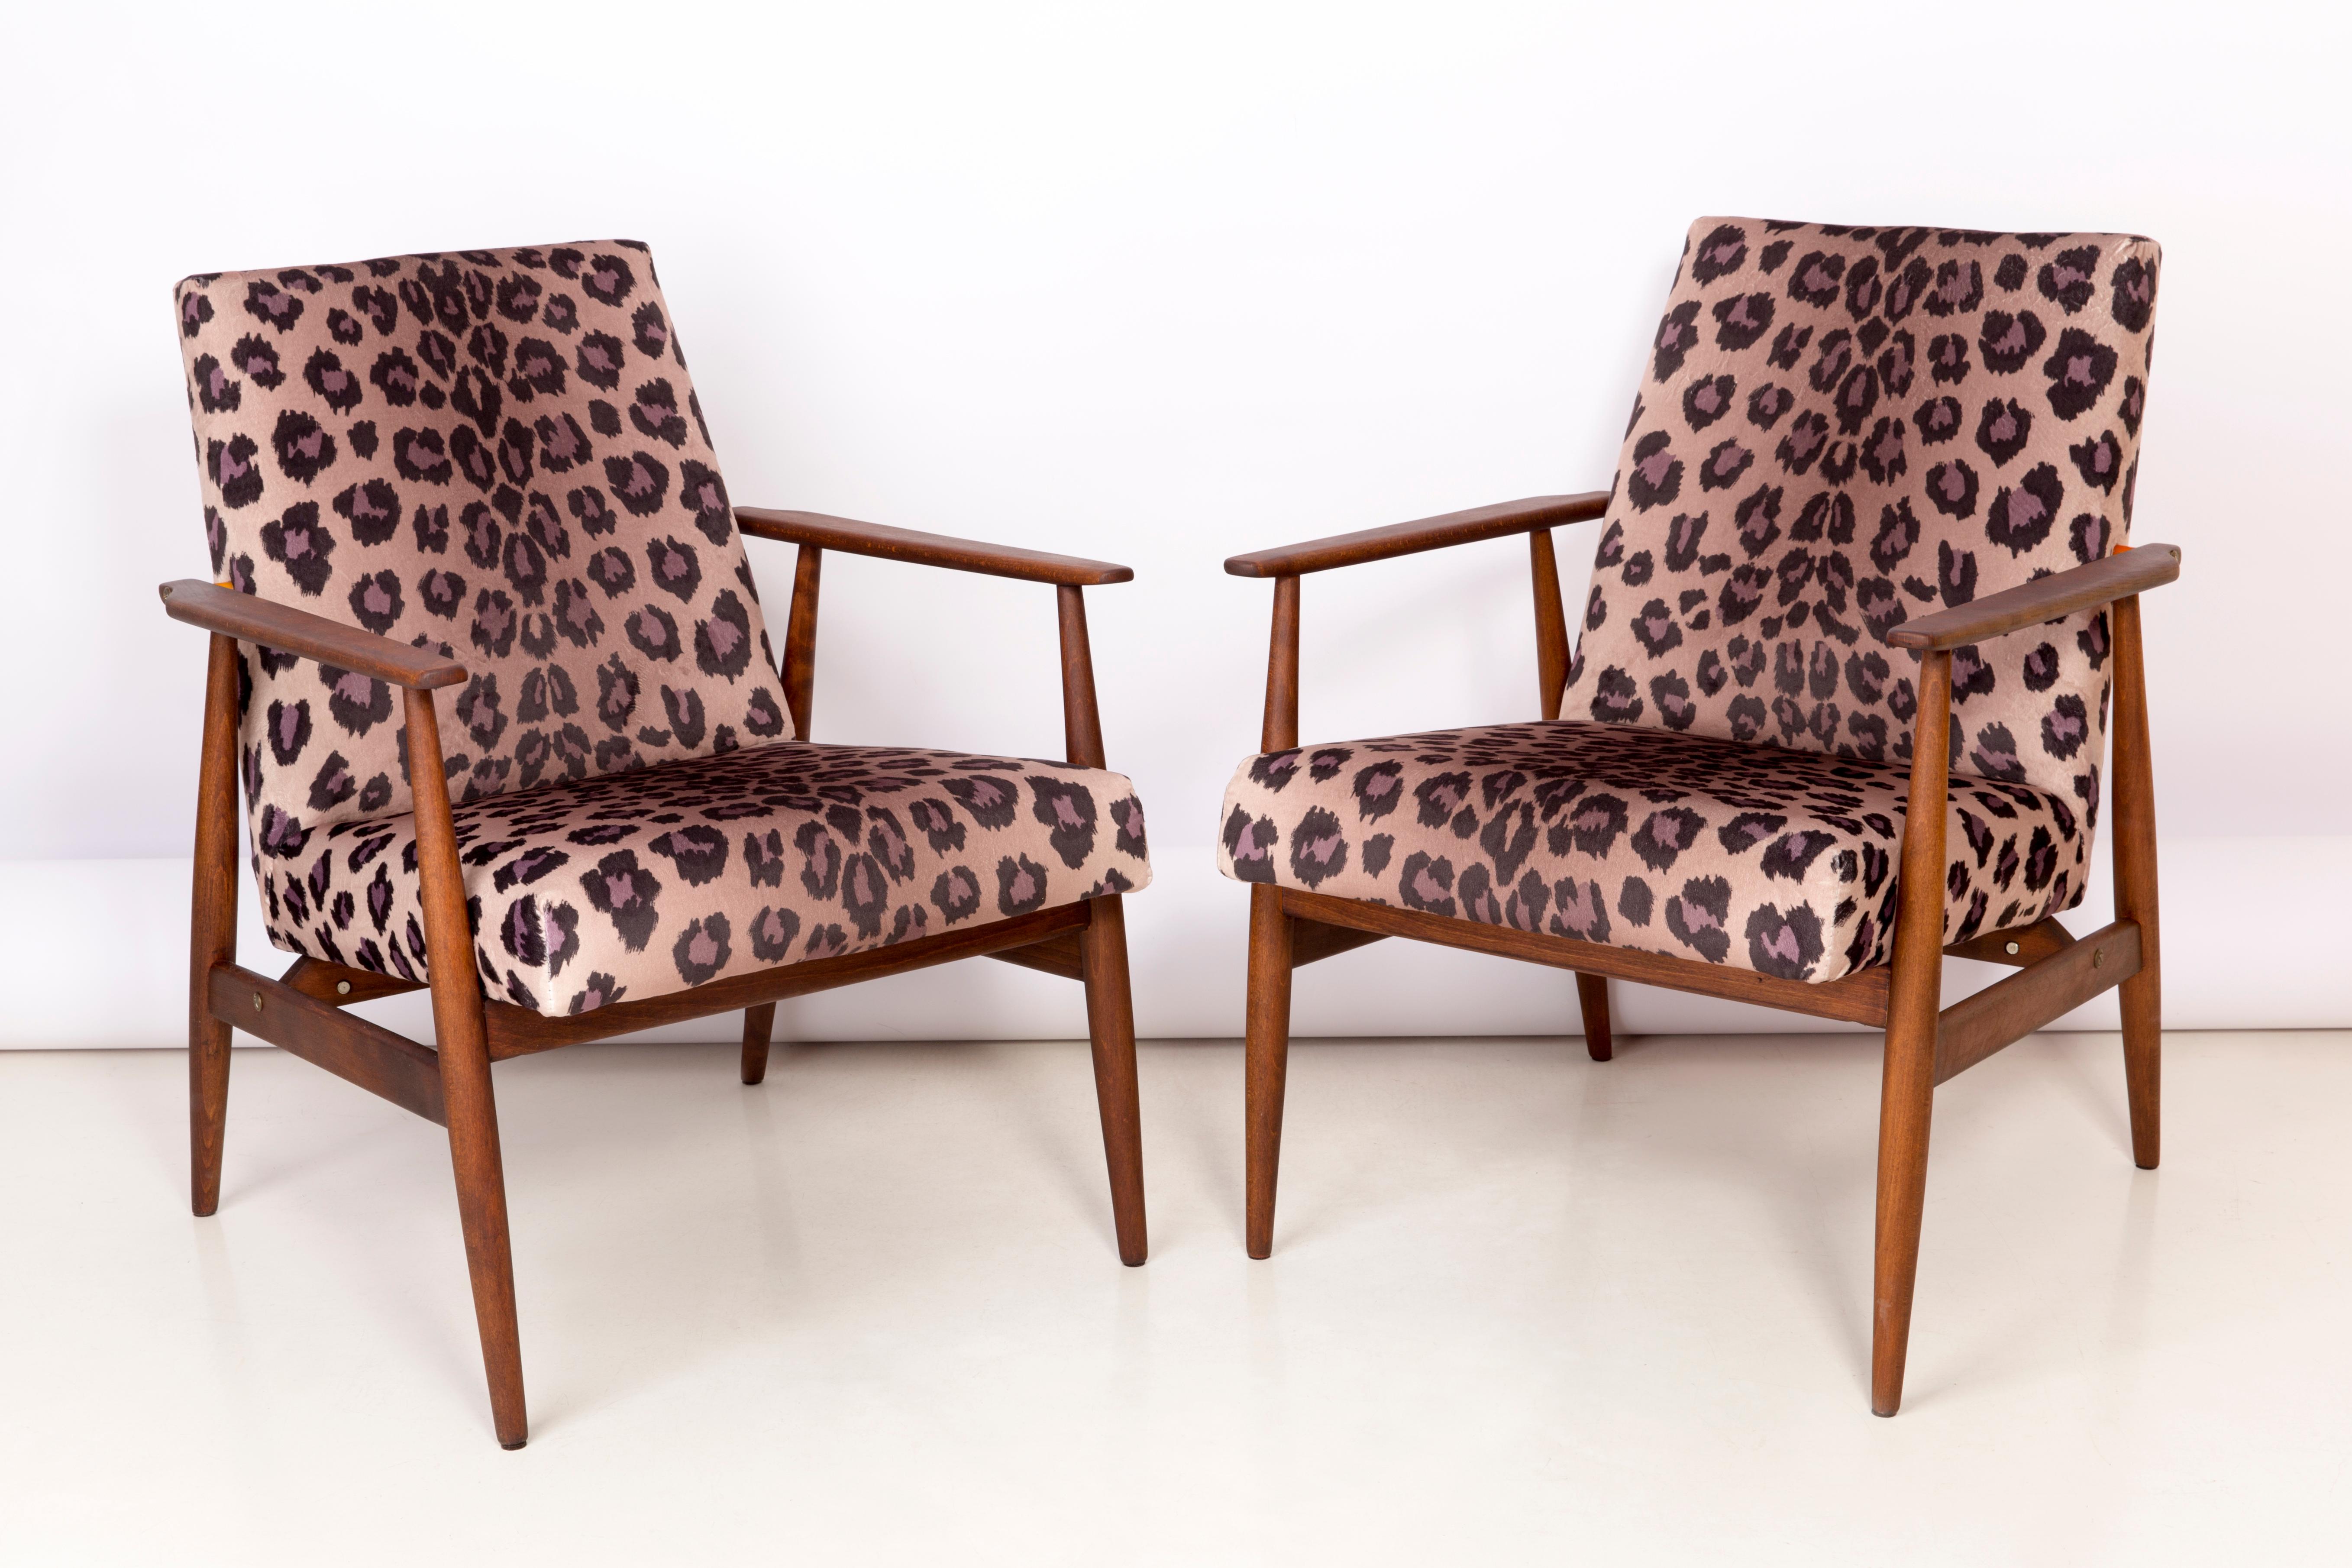 A beautiful, restored armchairs designed by Henryk Lis. Furniture after full carpentry and upholstery renovation. The fabric, which is covered with a backrest and a seat, is a high-quality italian velvet upholstery printed in leopard pattern. The